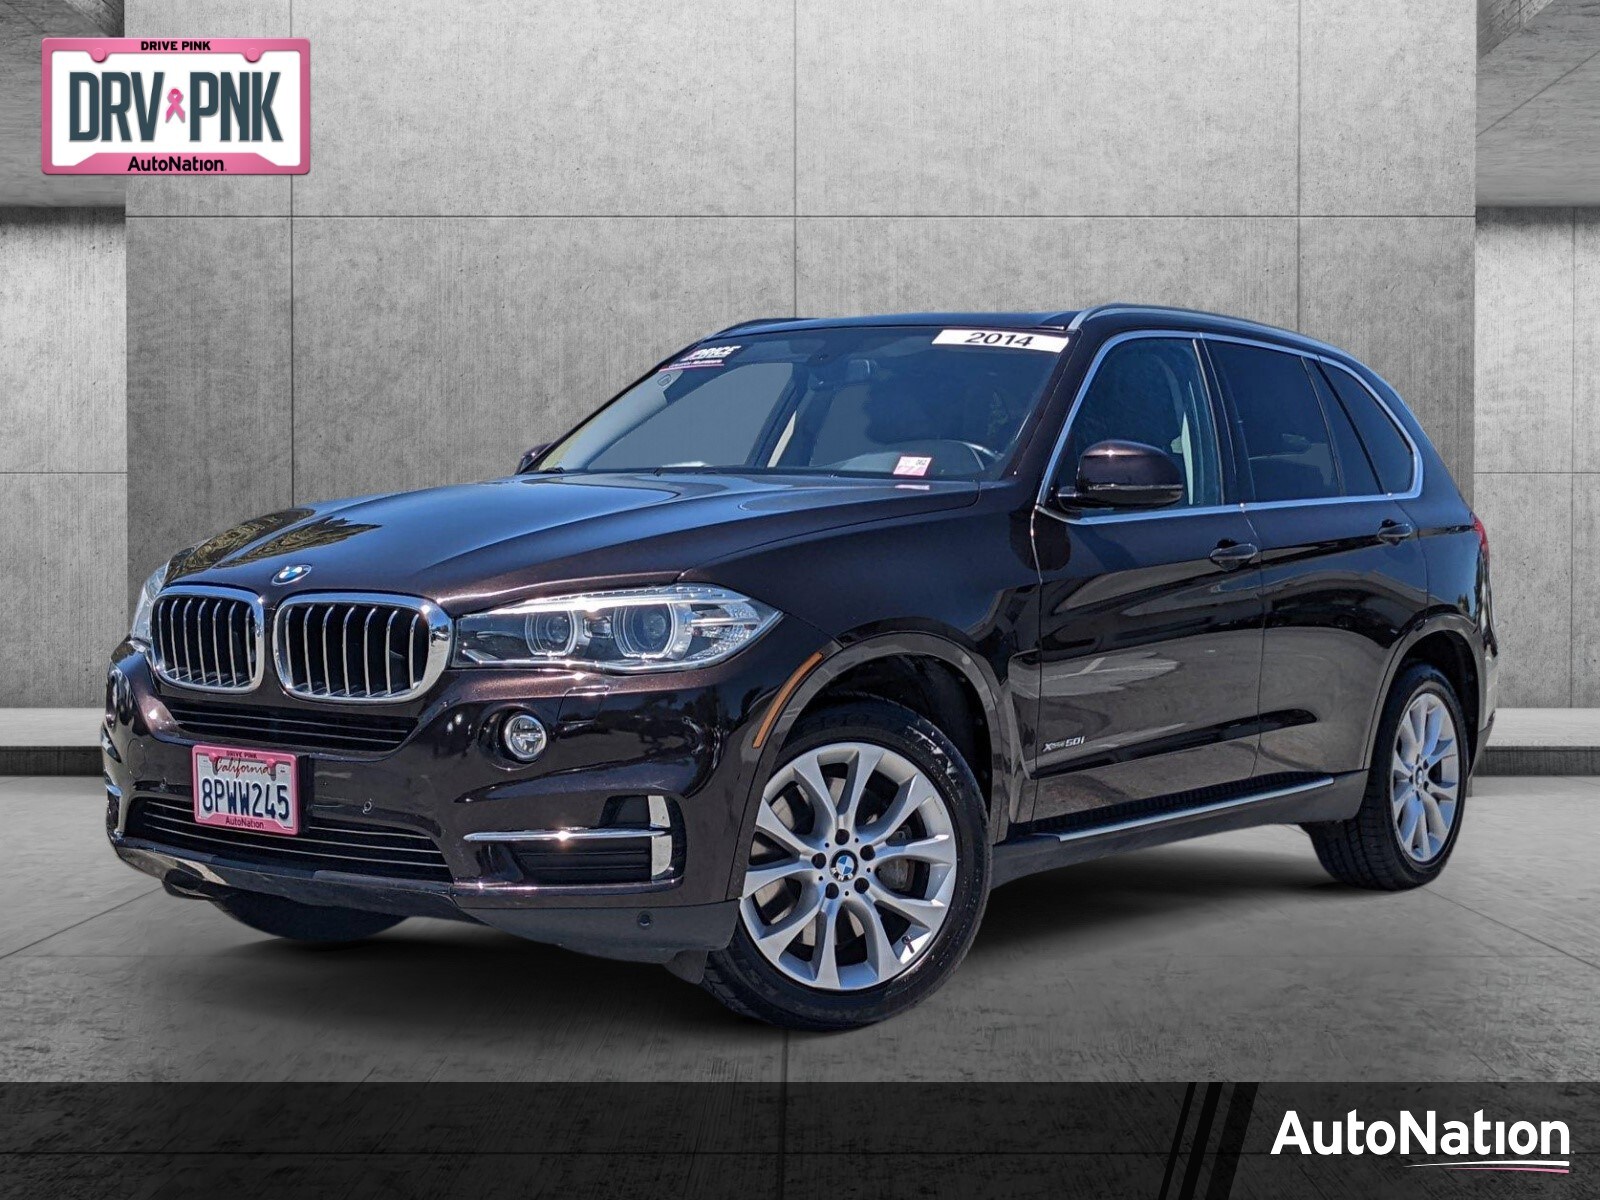 Used Bmw X5 Mountain View Ca